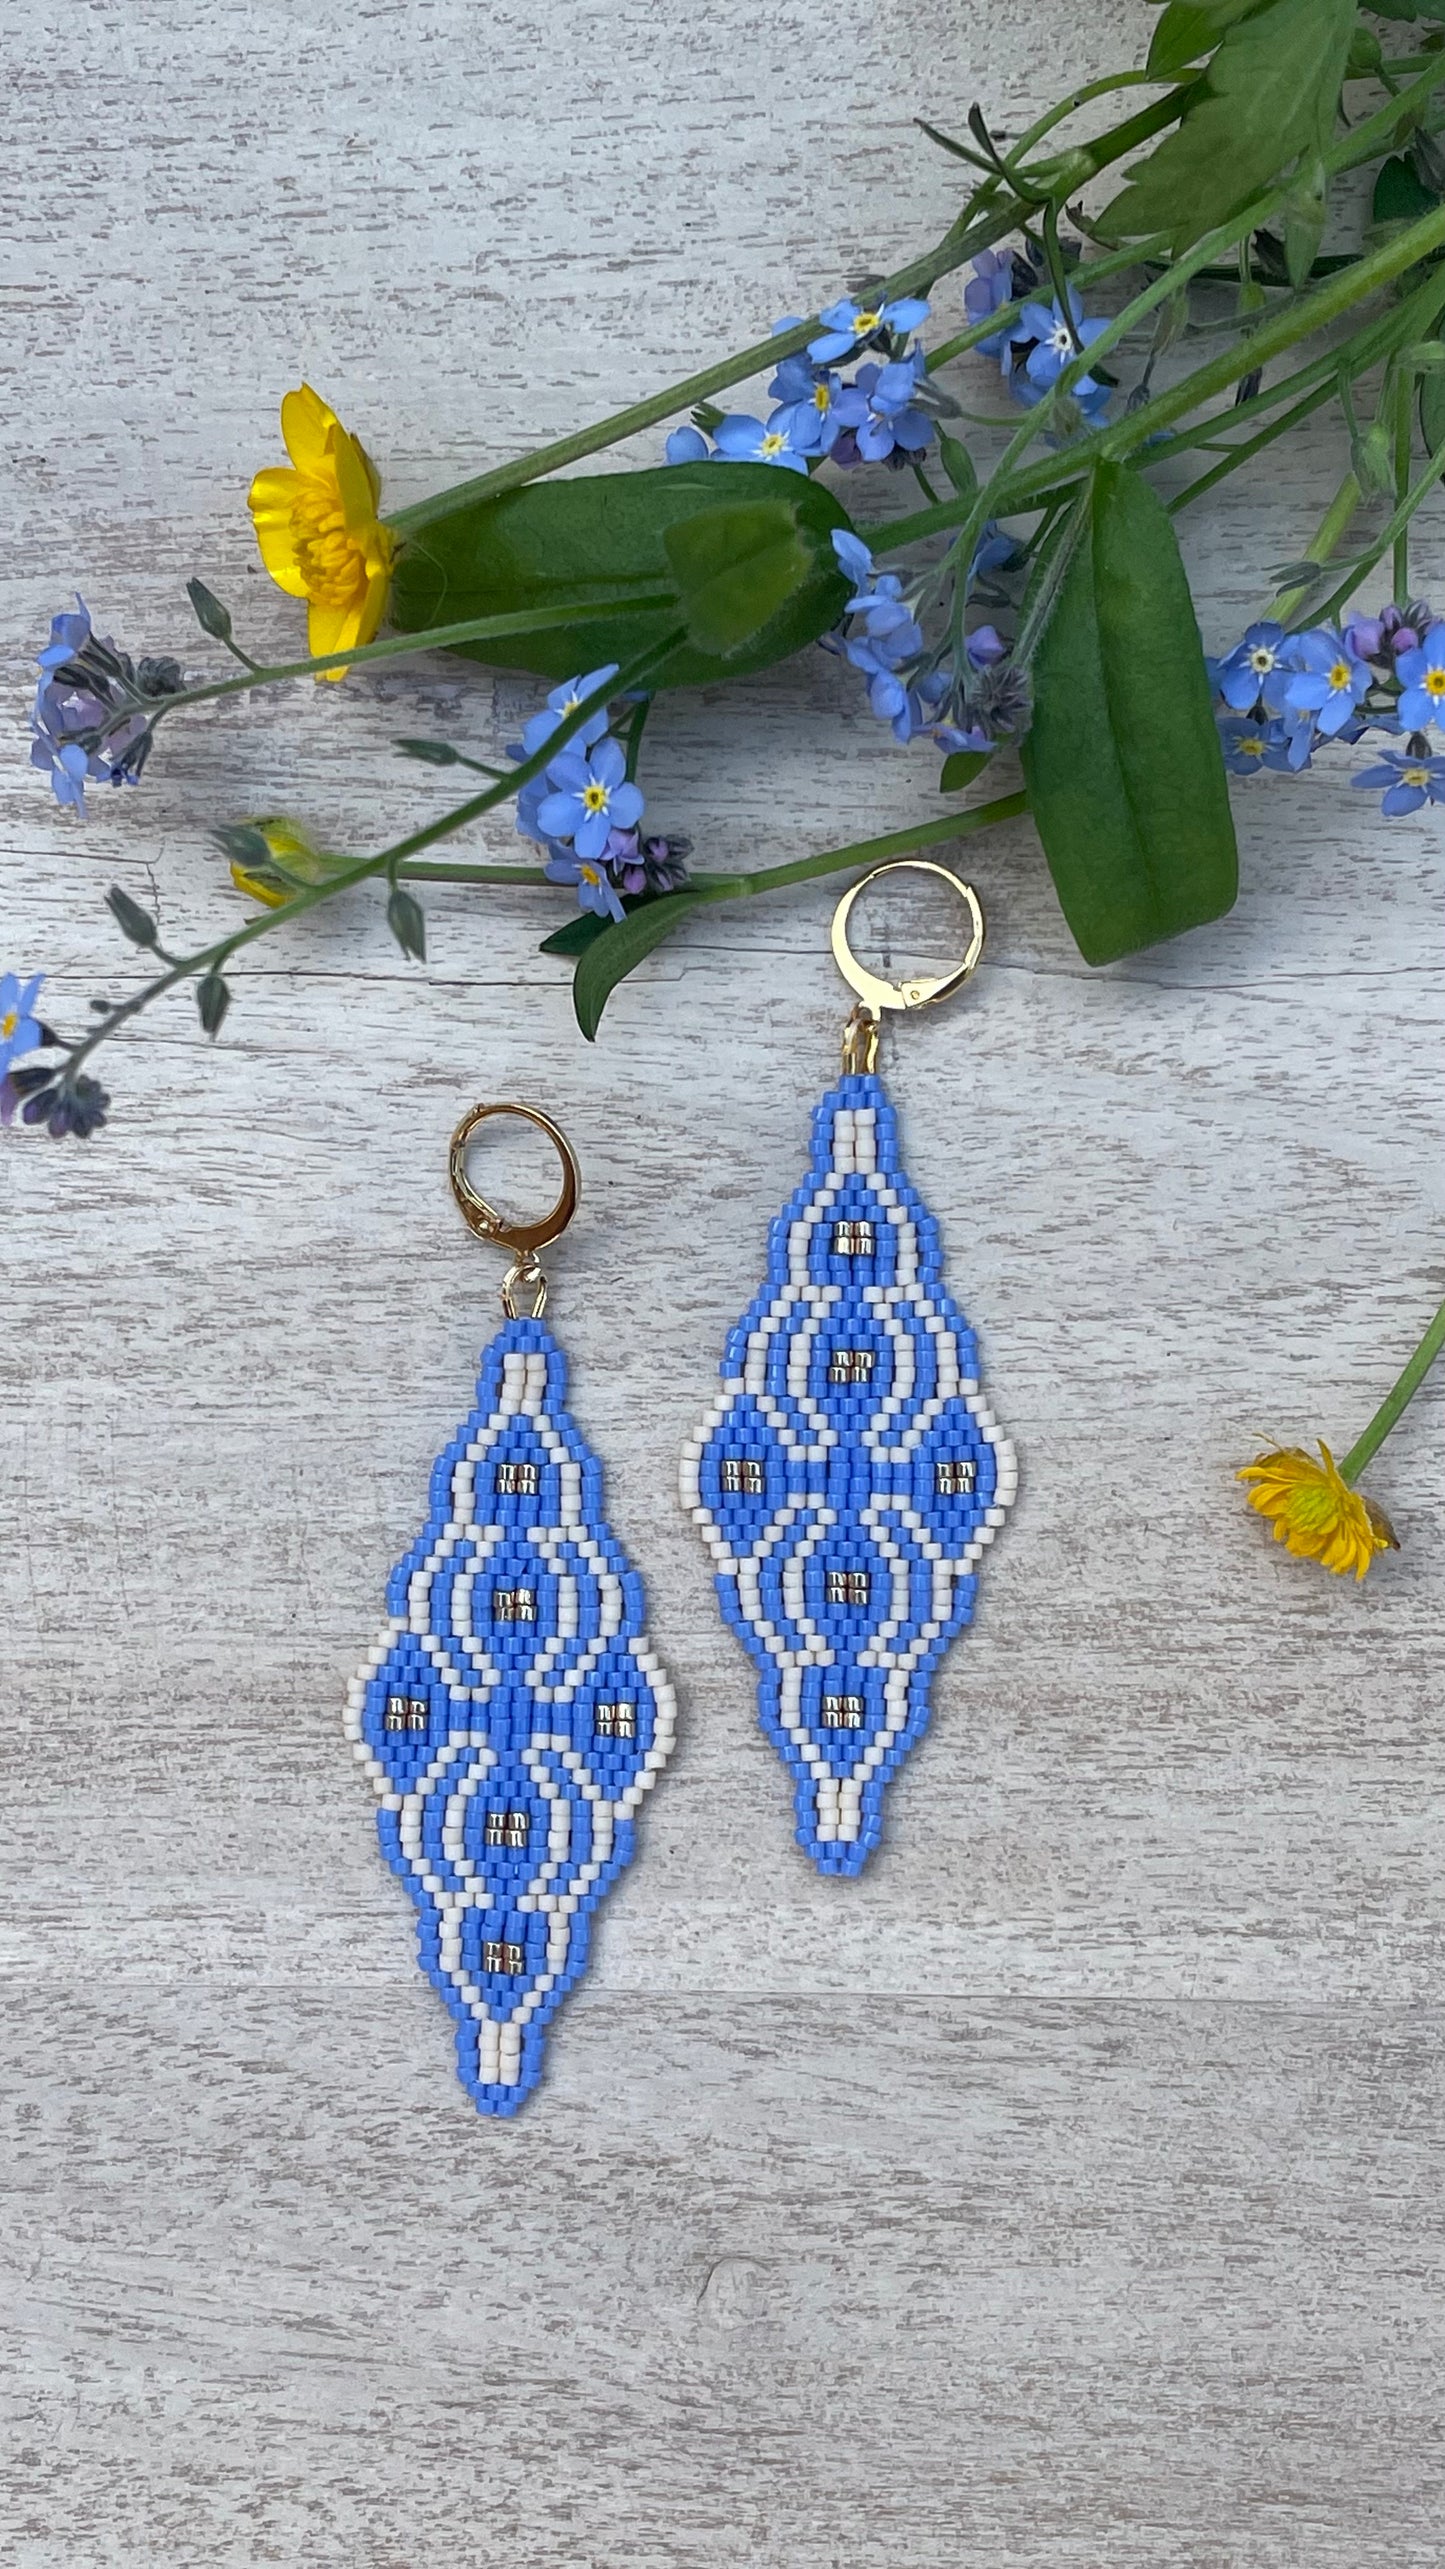 Andros Beaded Earring Pattern - Digital Download